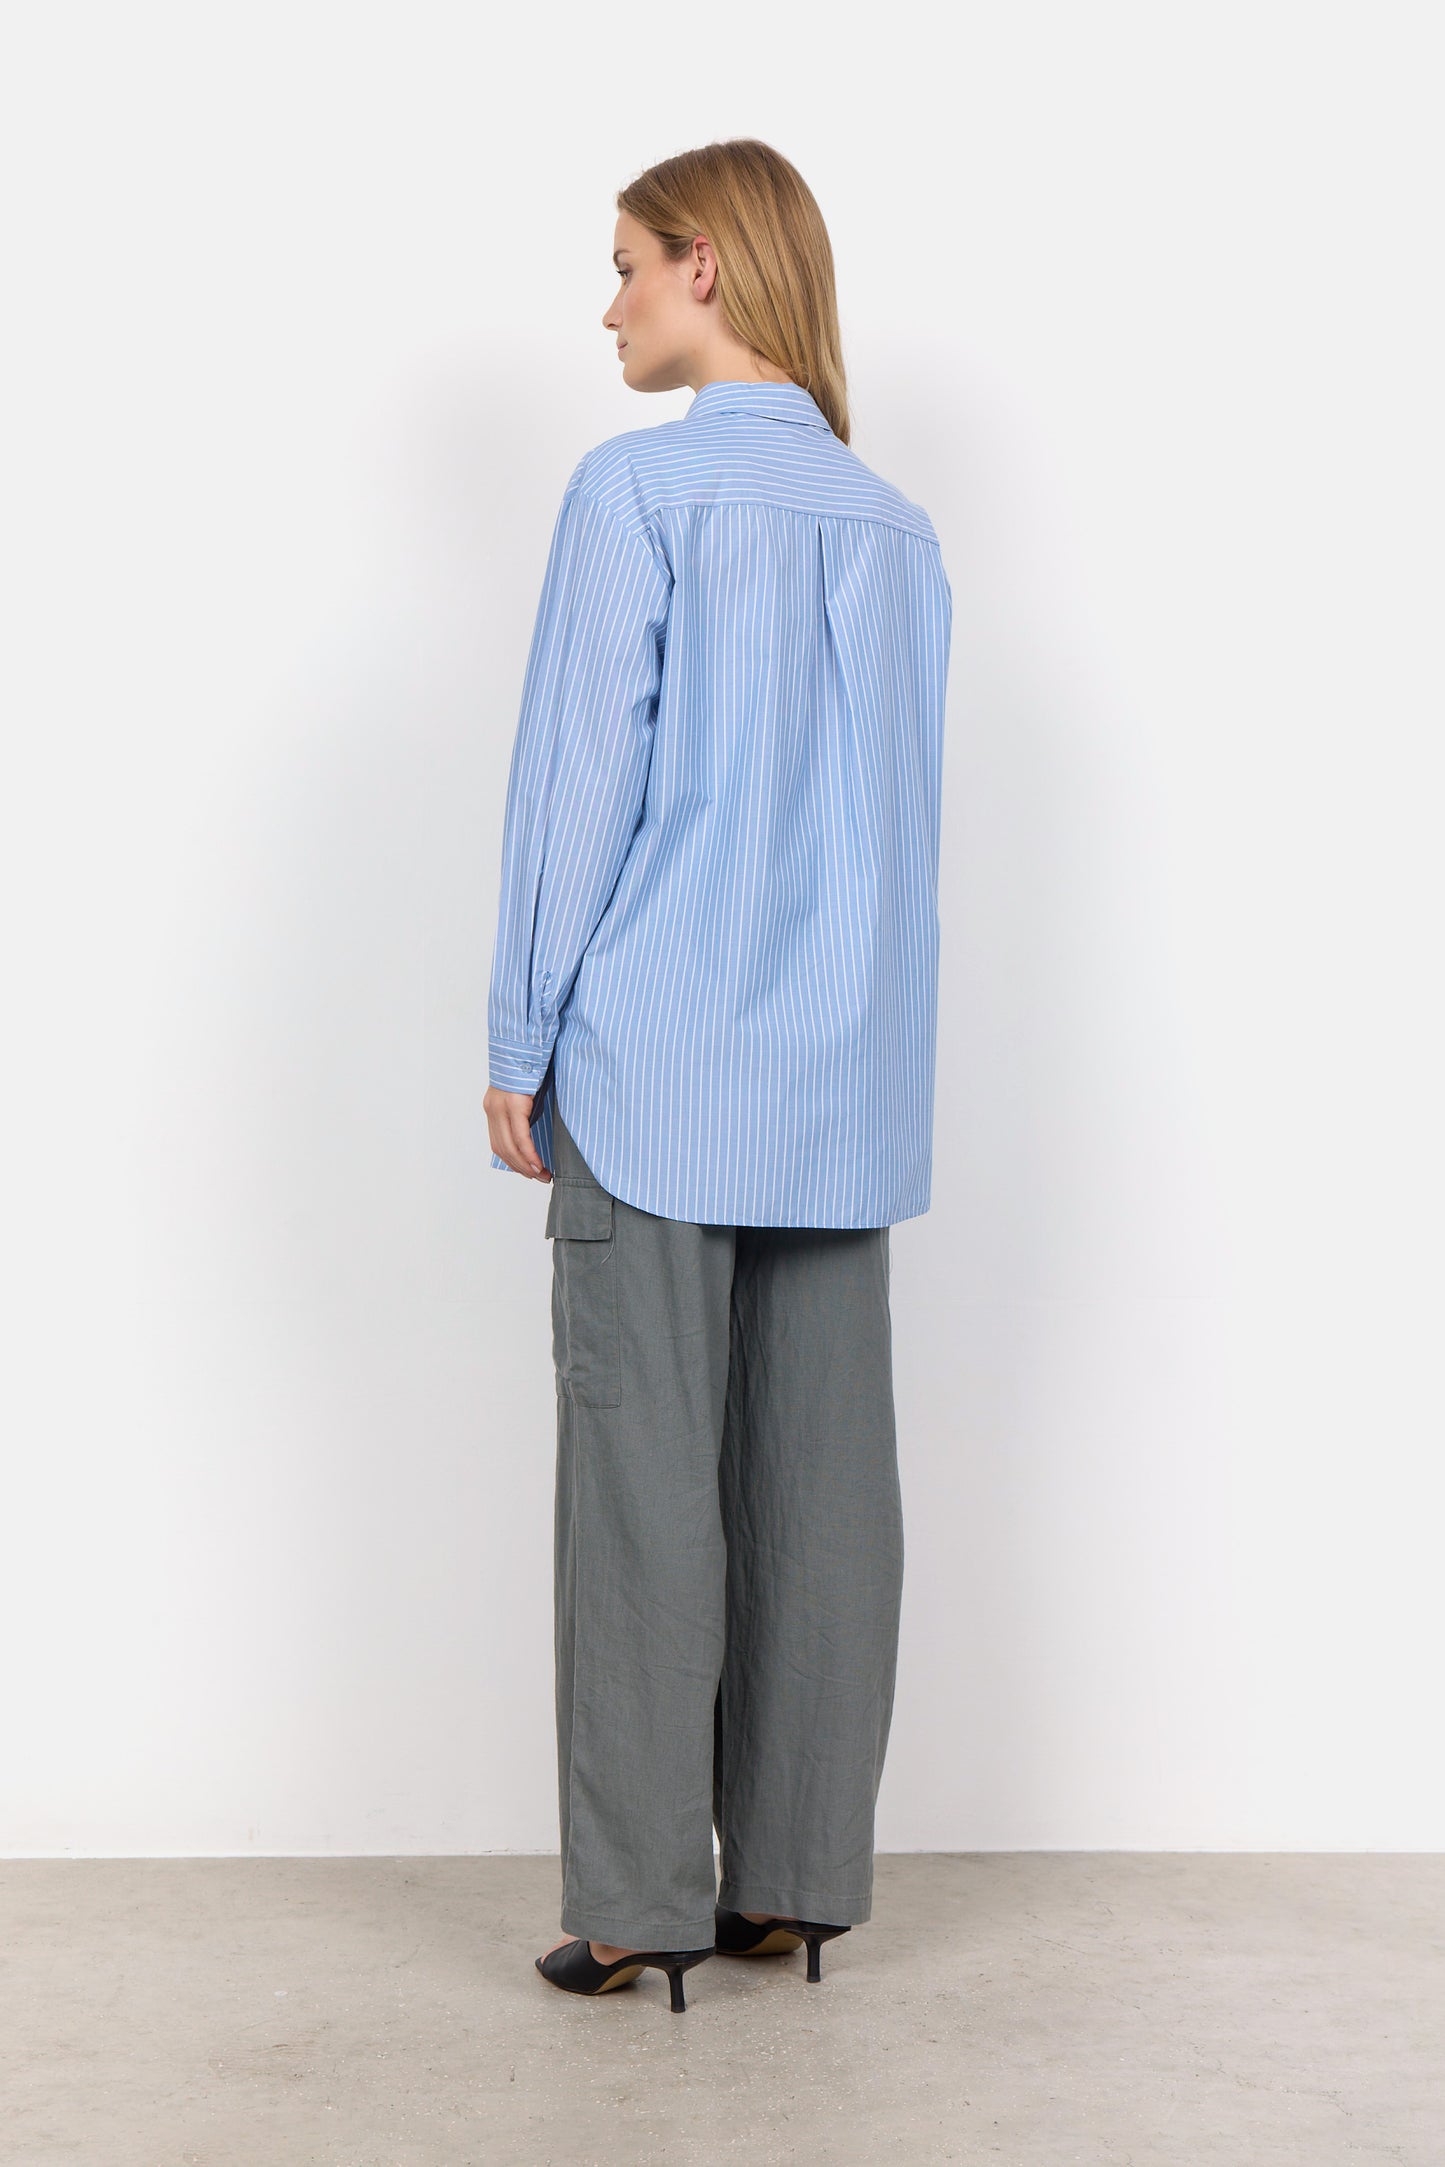 SOYA CONCEPT Dicle 2 Classic Oversized Blue & White Striped Blouse